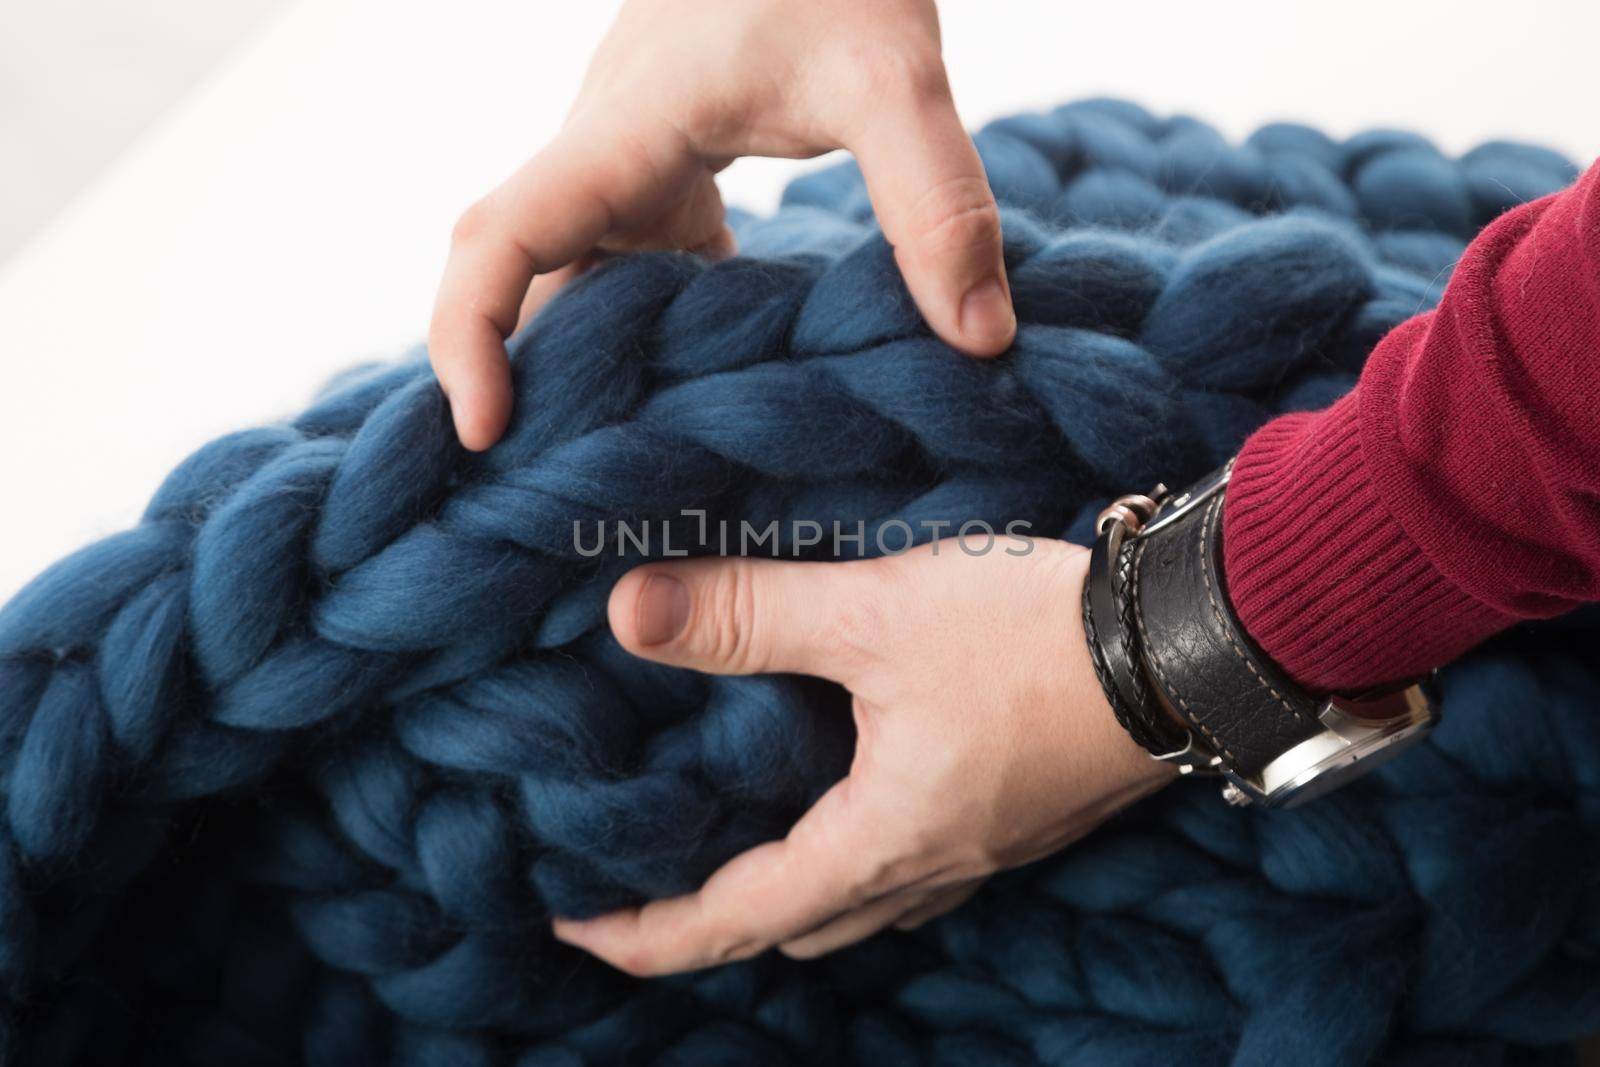 blanket made of natural sheep wool of coarse knit in men's hands.